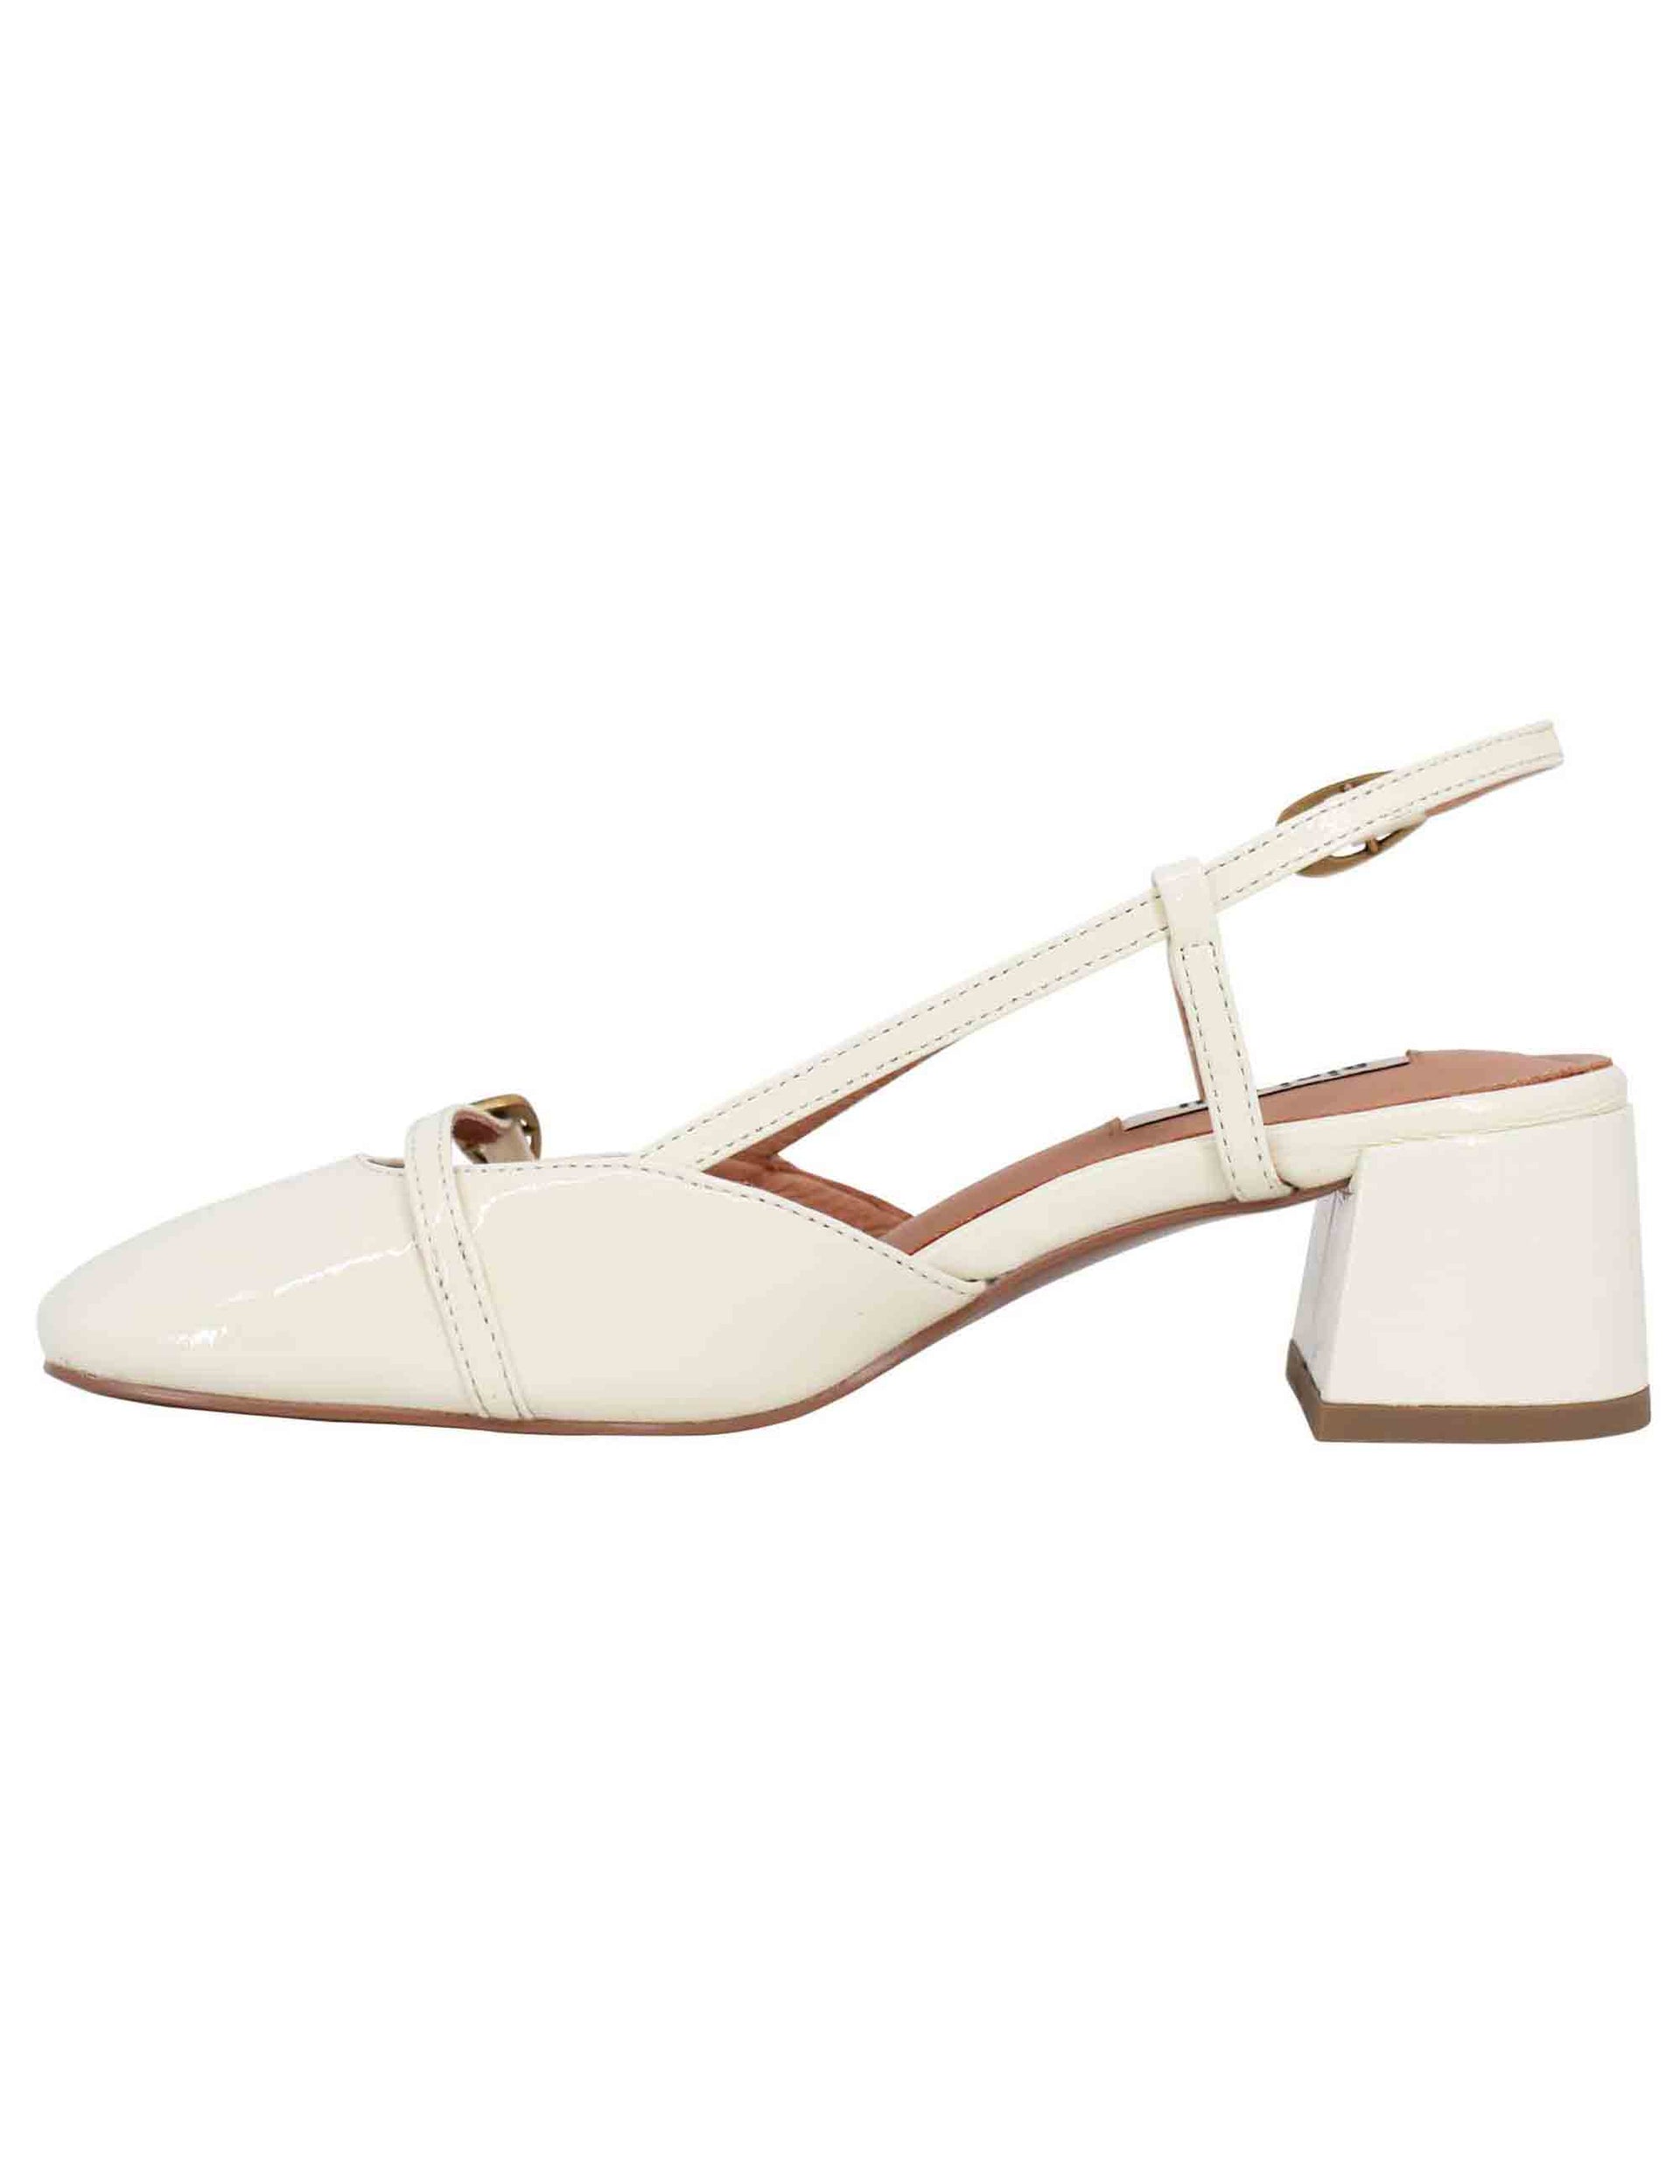 Women's slingback pumps in white patent leather with Patty buckle